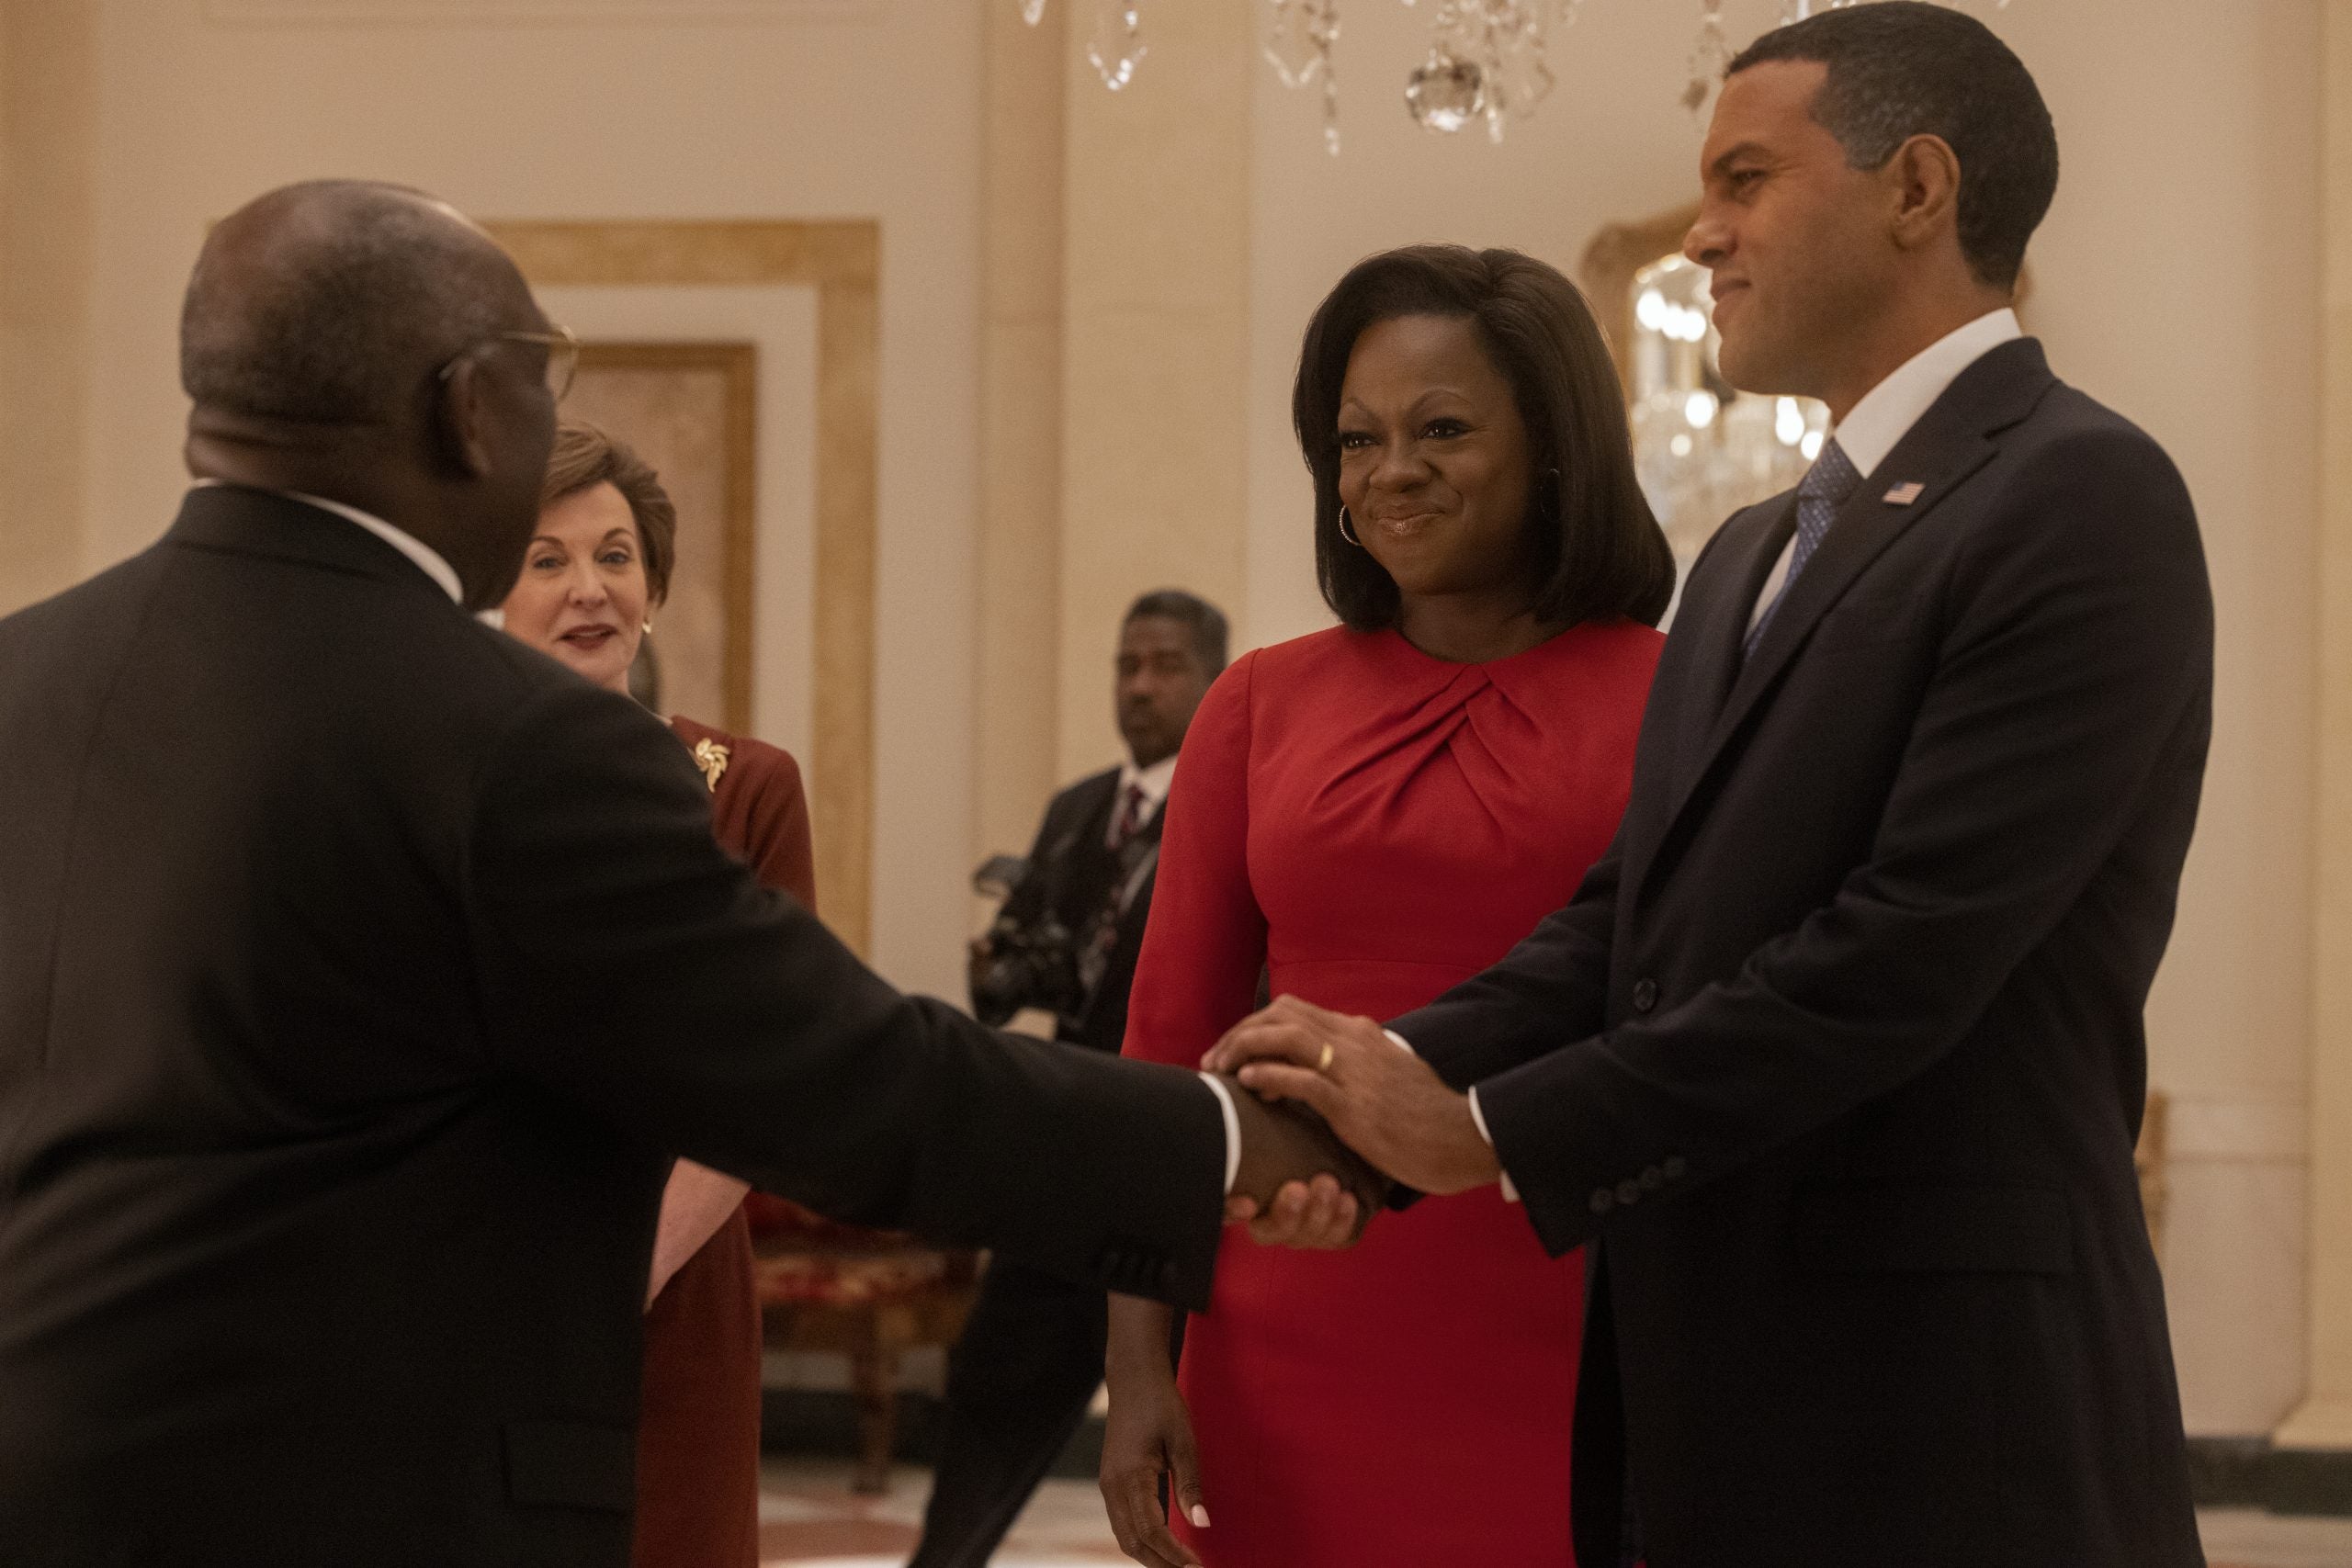 WATCH: Showtime Releases First Trailer For Viola Davis’ Michelle Obama Biopic, “The First Lady”